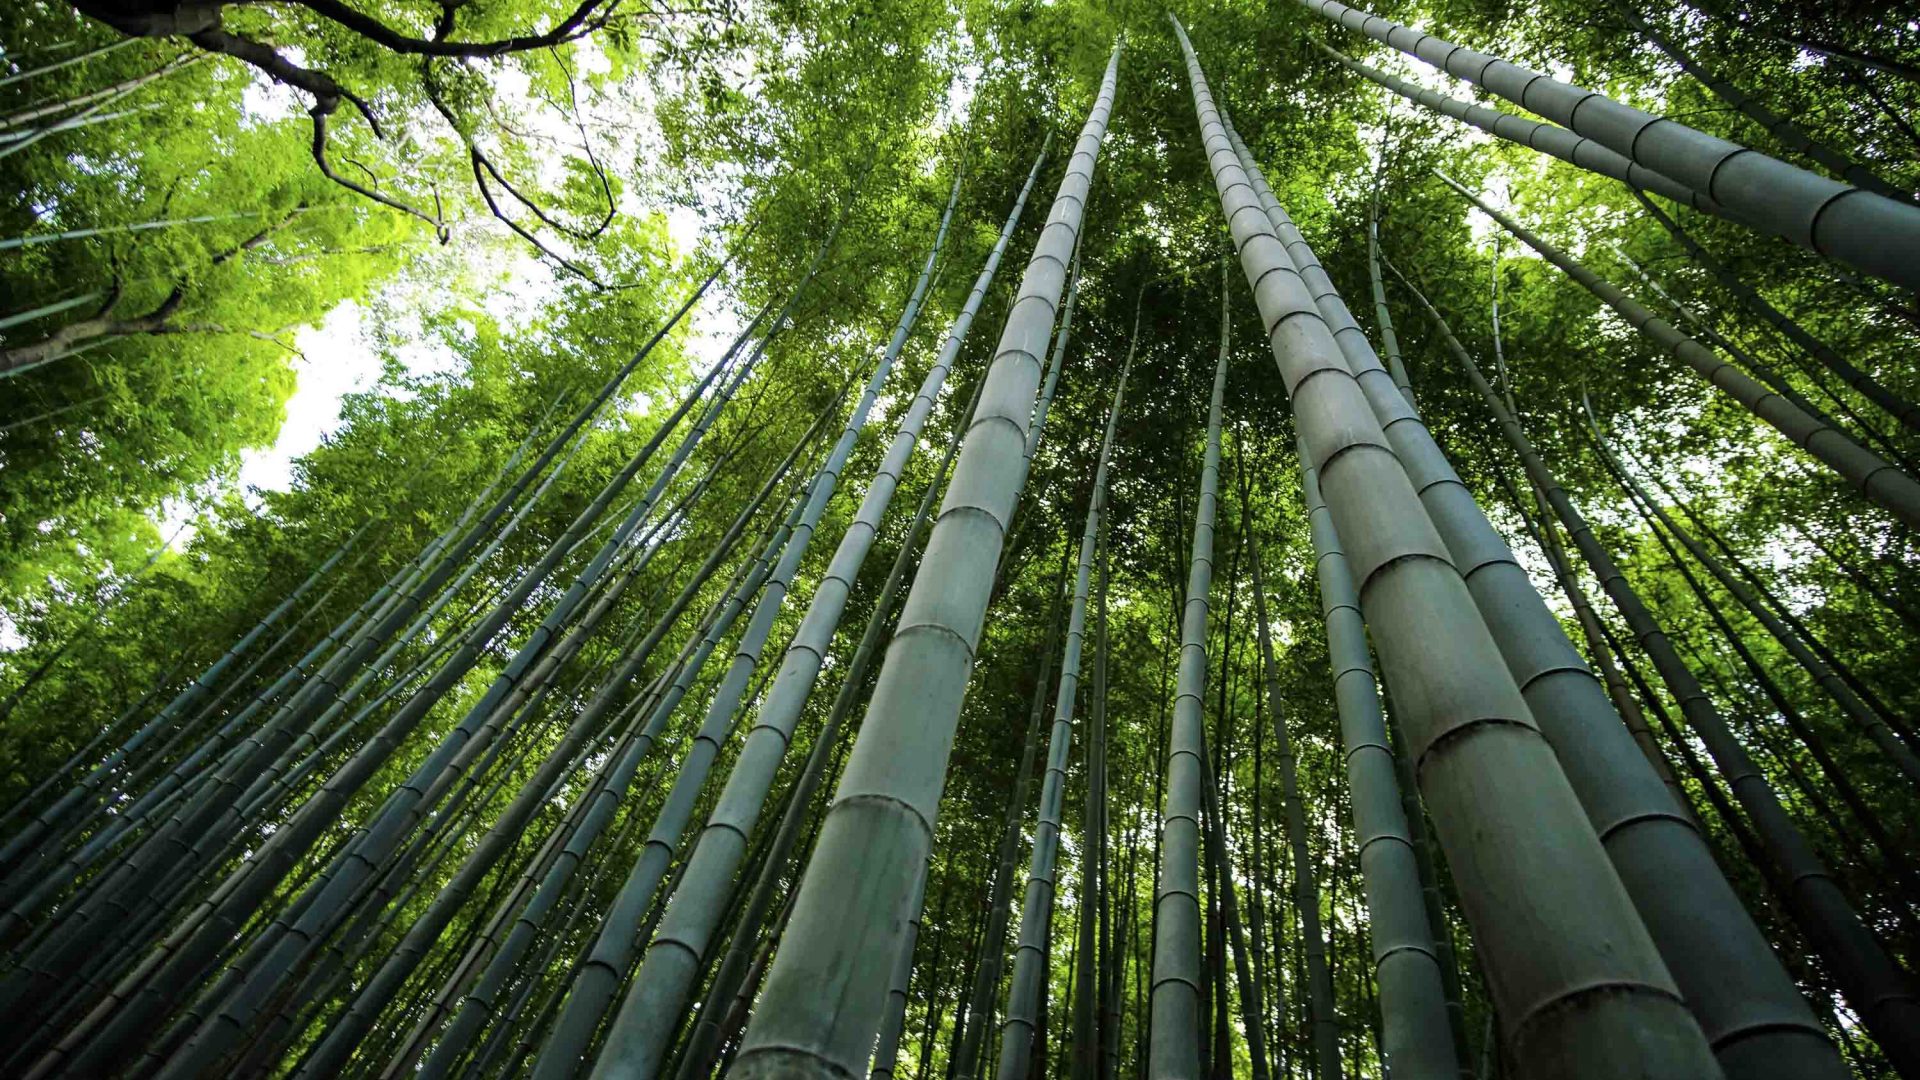 A forest of tall bamboo.